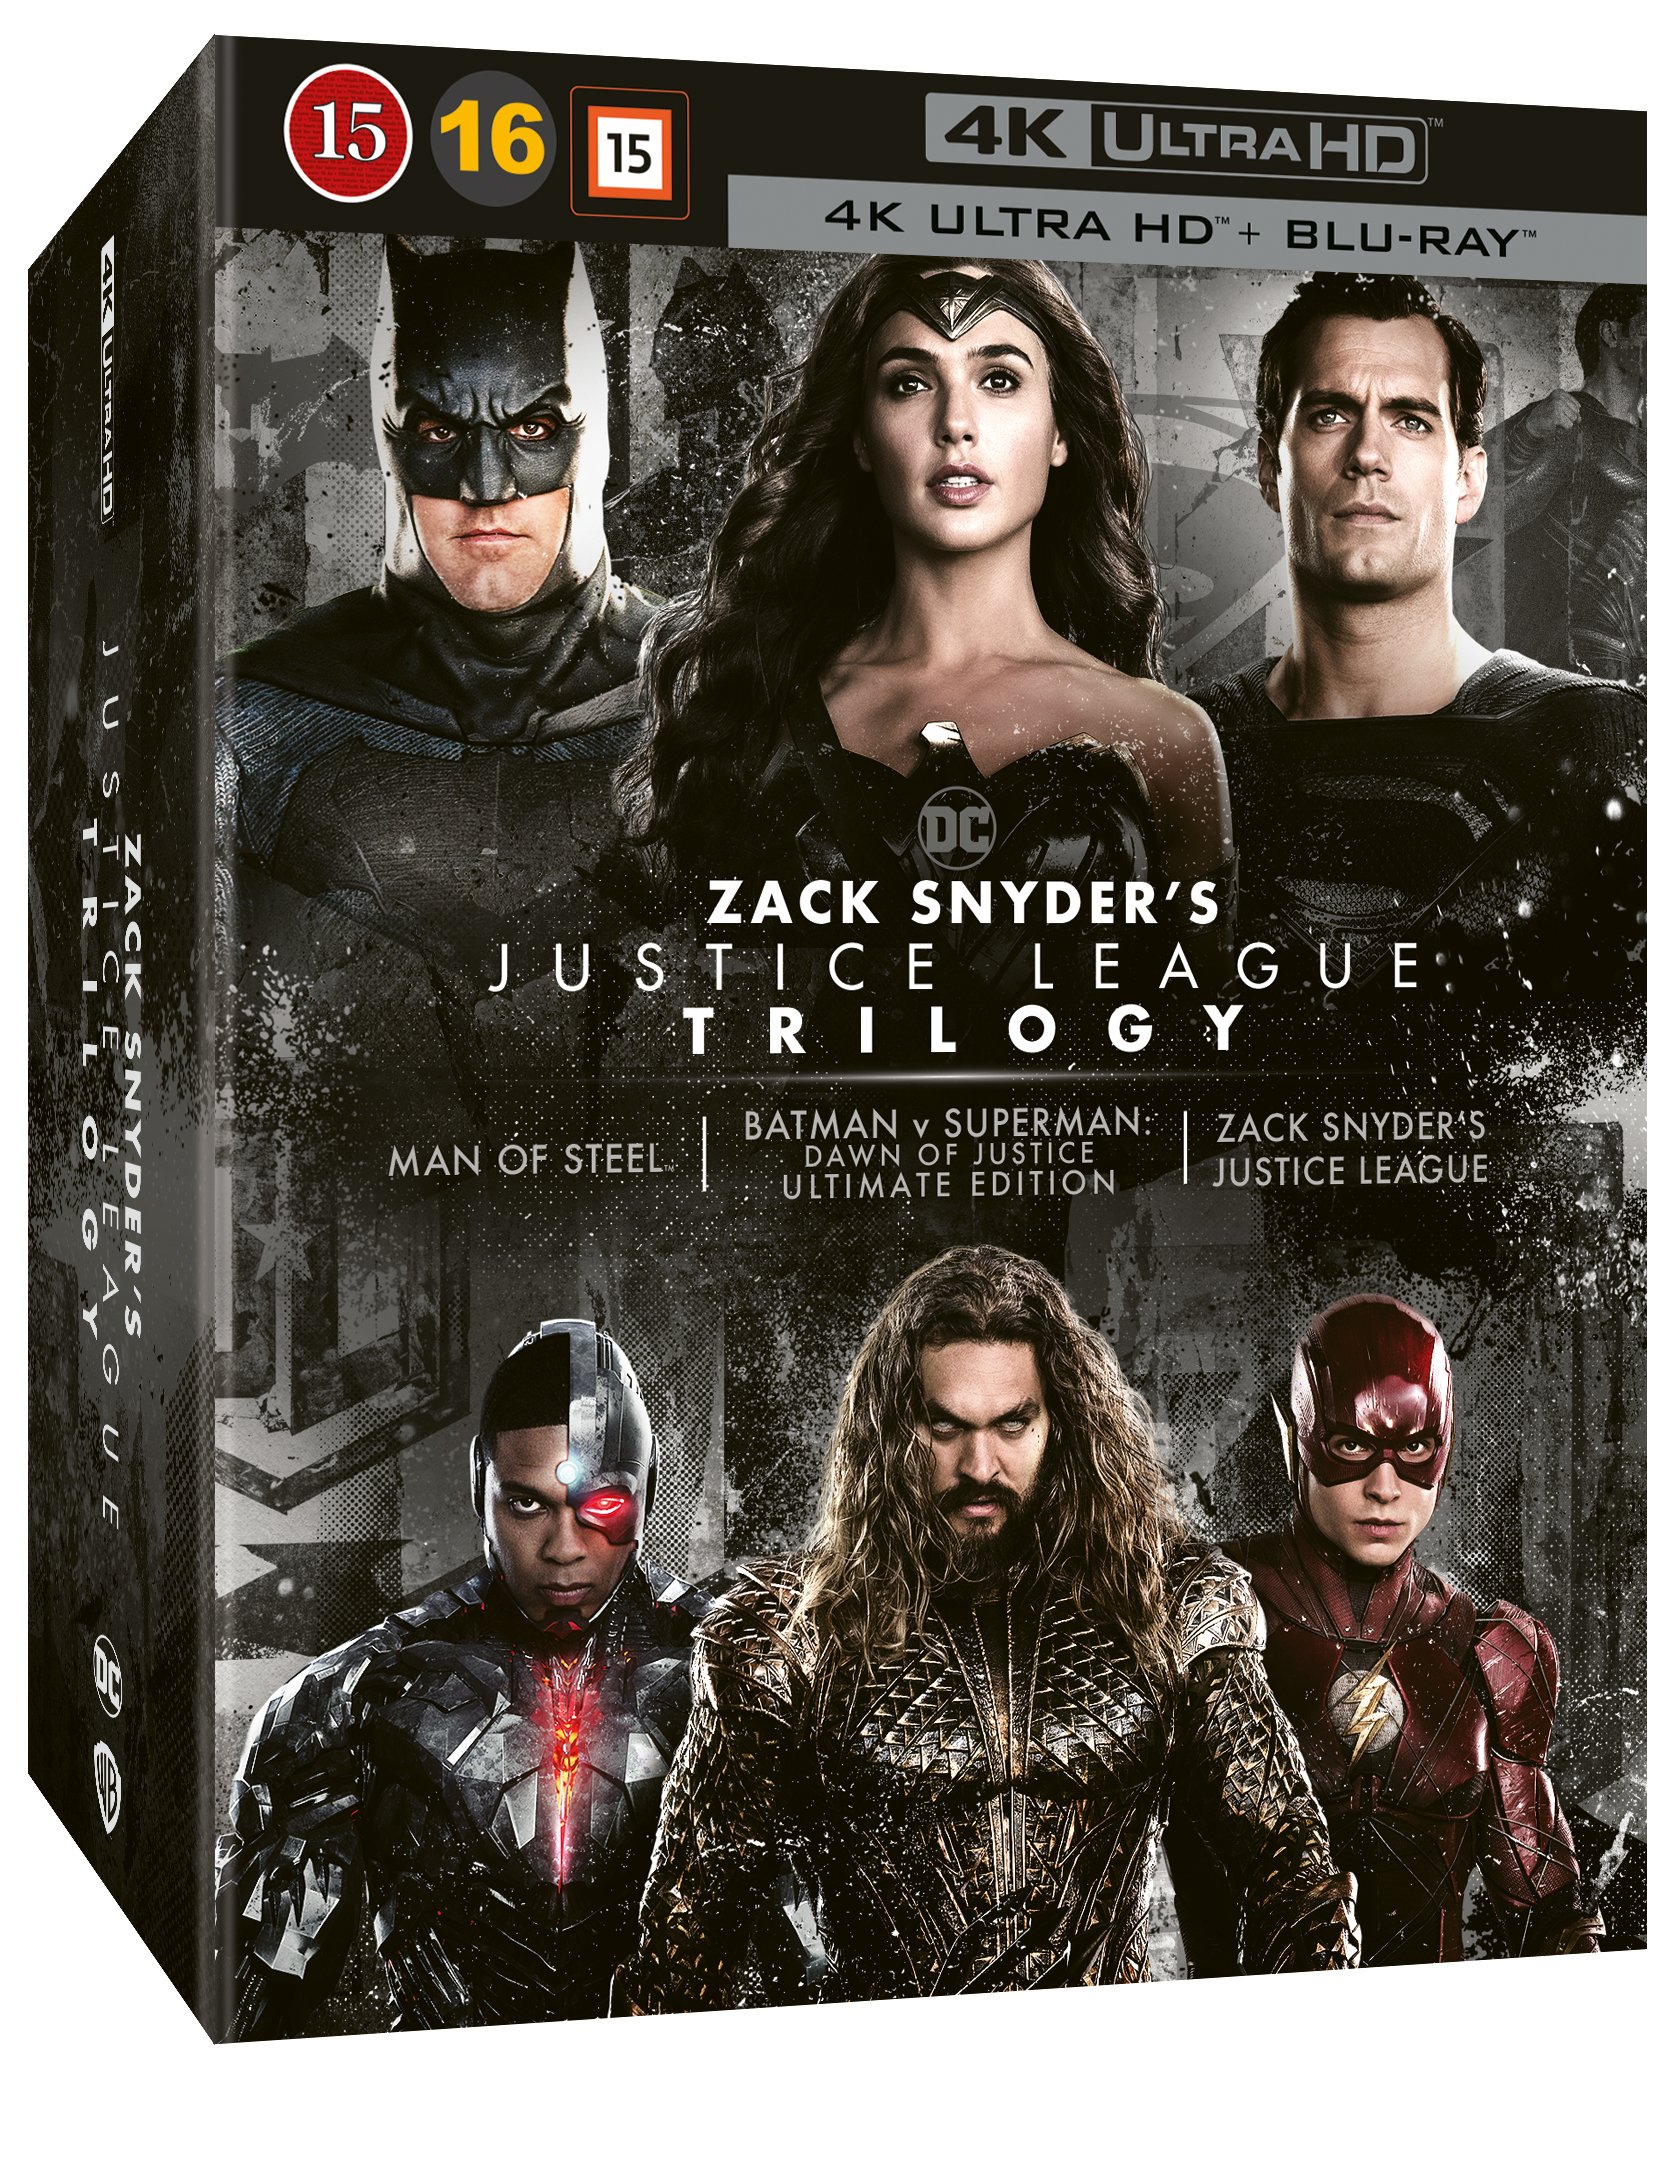 Buy Zack Snyders Justice League Trilogy 4k Ultra Hd Blu Ray 8 Disc Free Shipping 